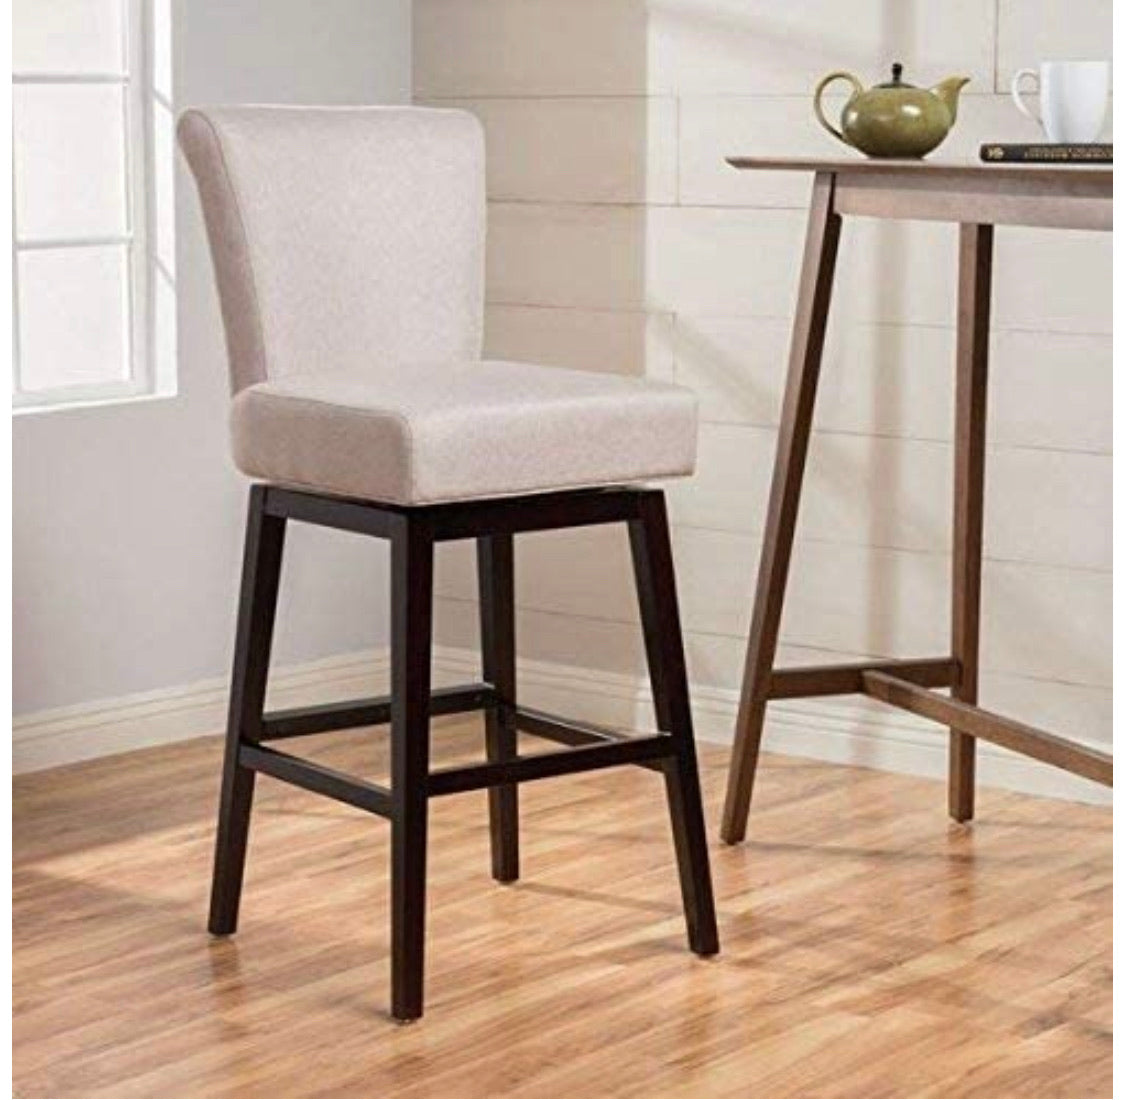 Tracy Swivel Counterstool - Christopher Knight Home -Wheat #4304